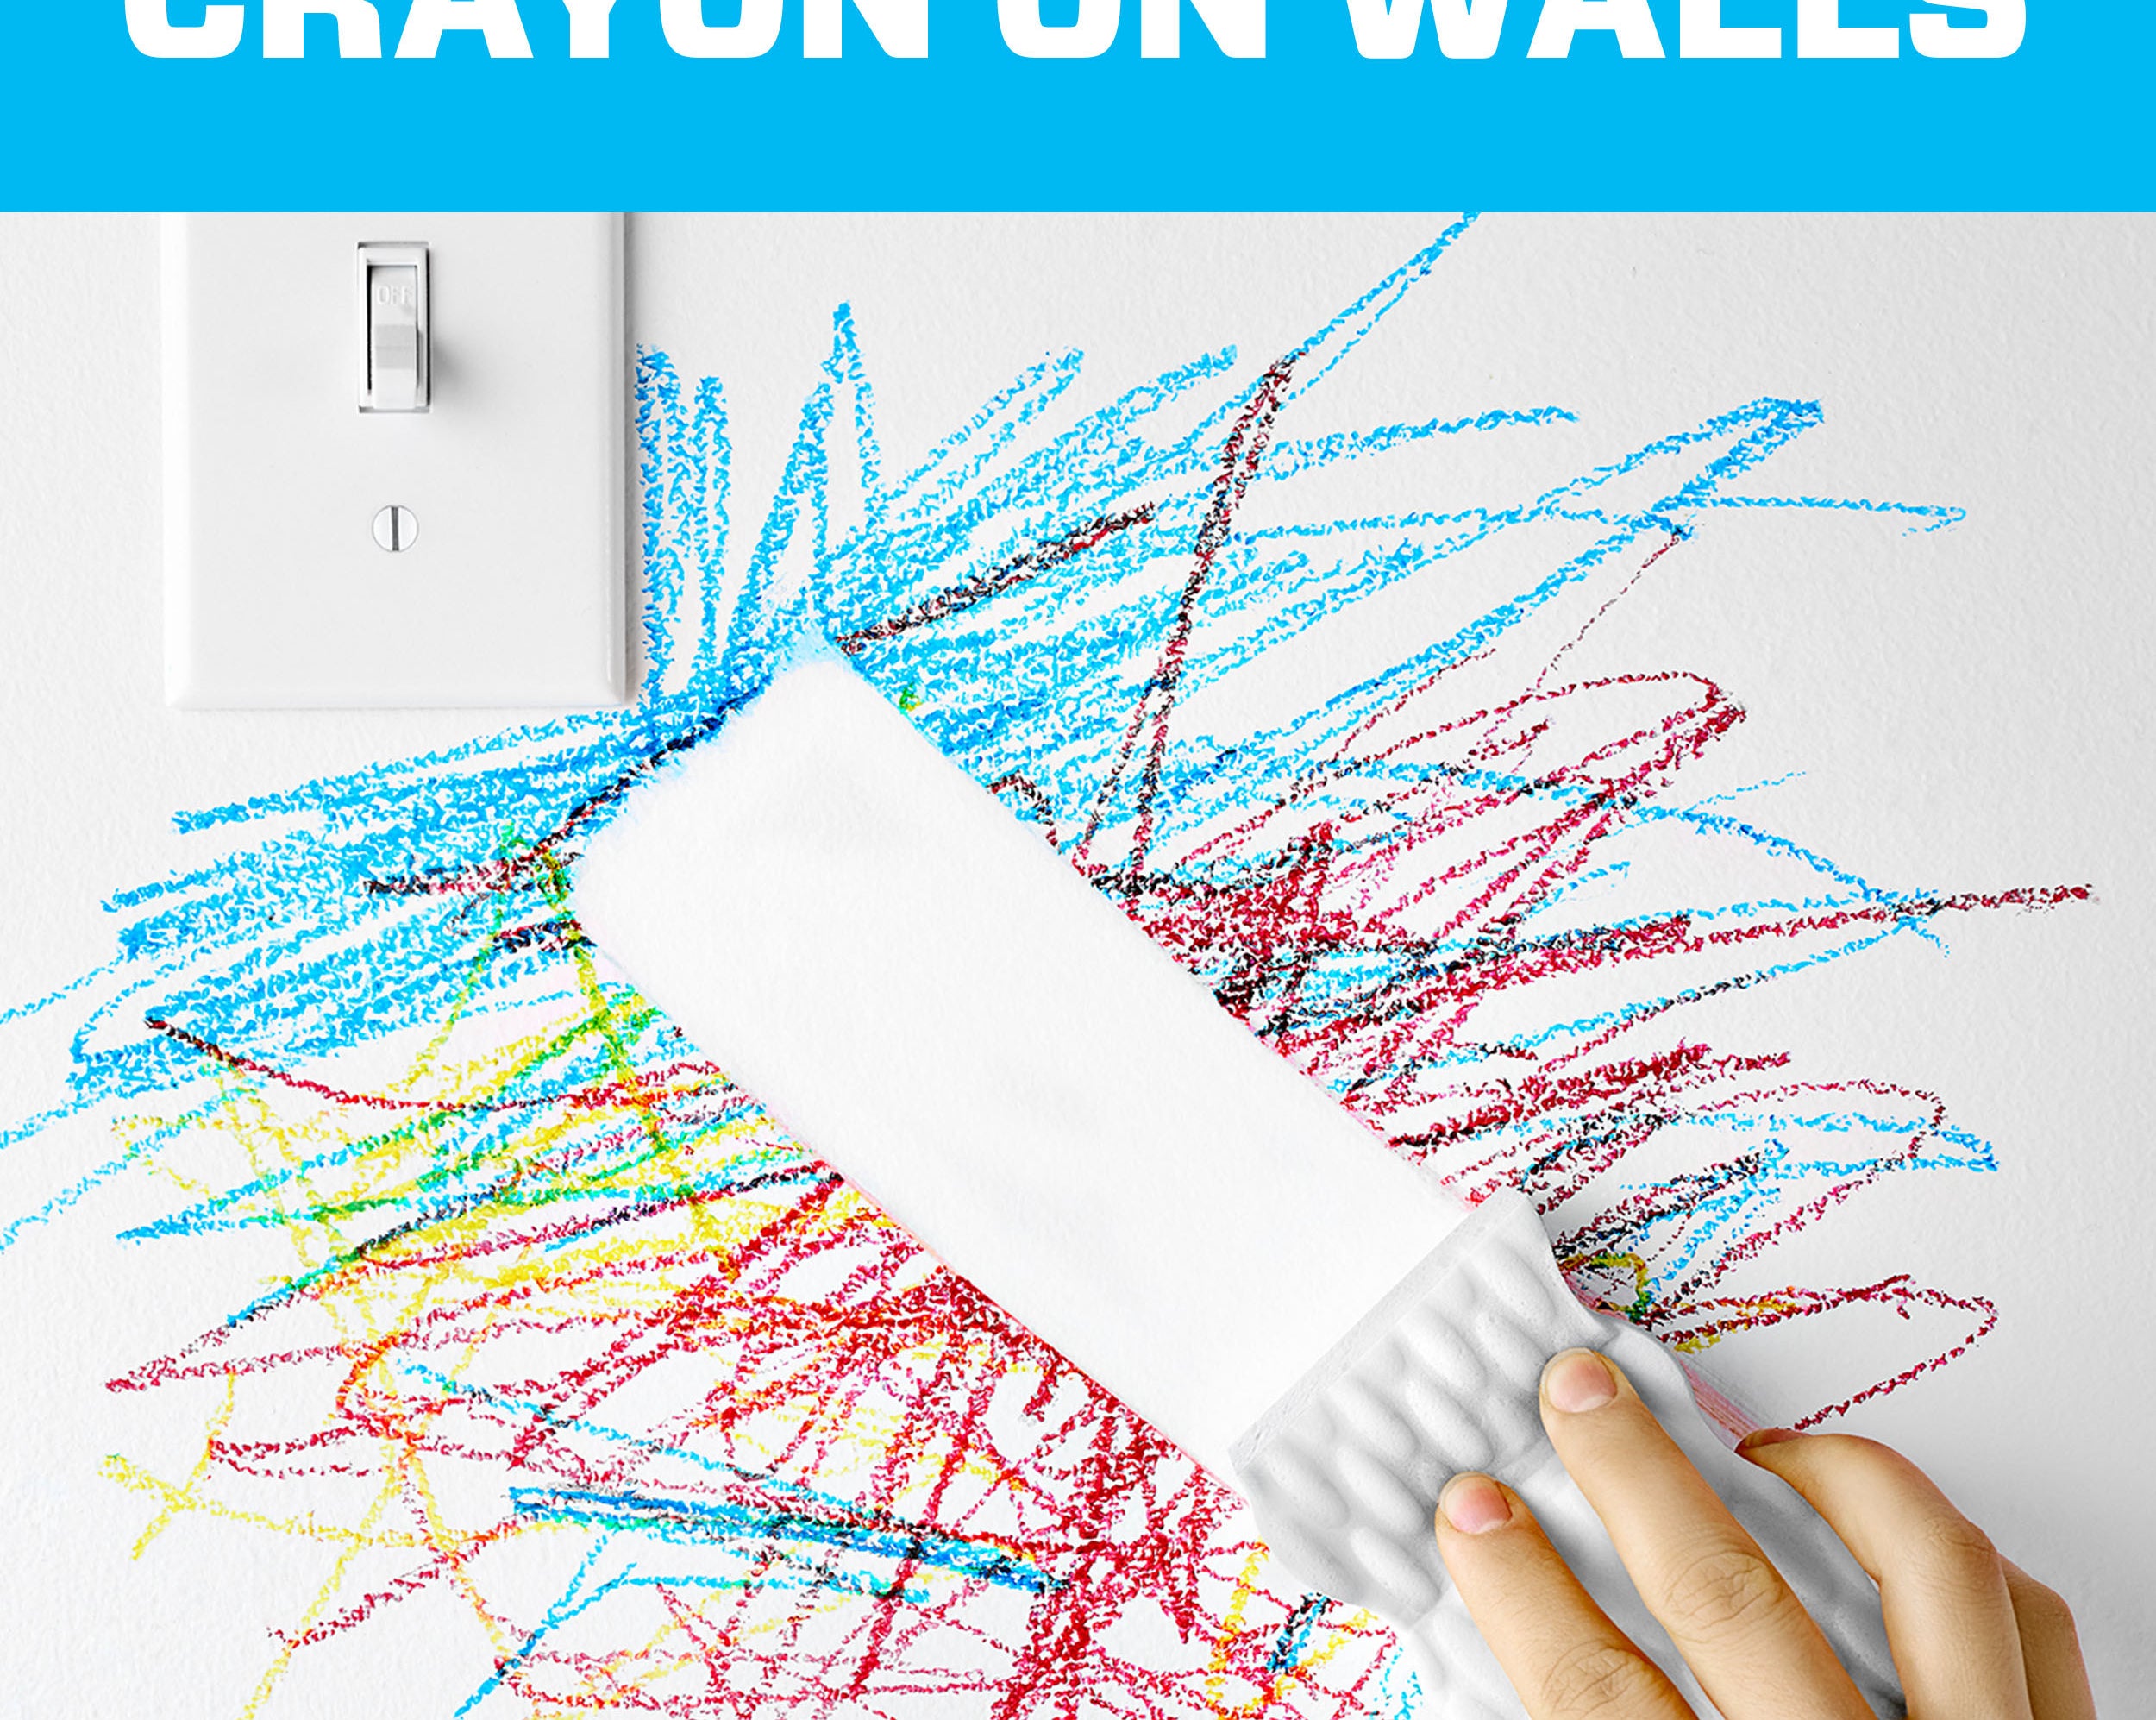 person using mr. clean magic eraser to remove crayon marks from a wall